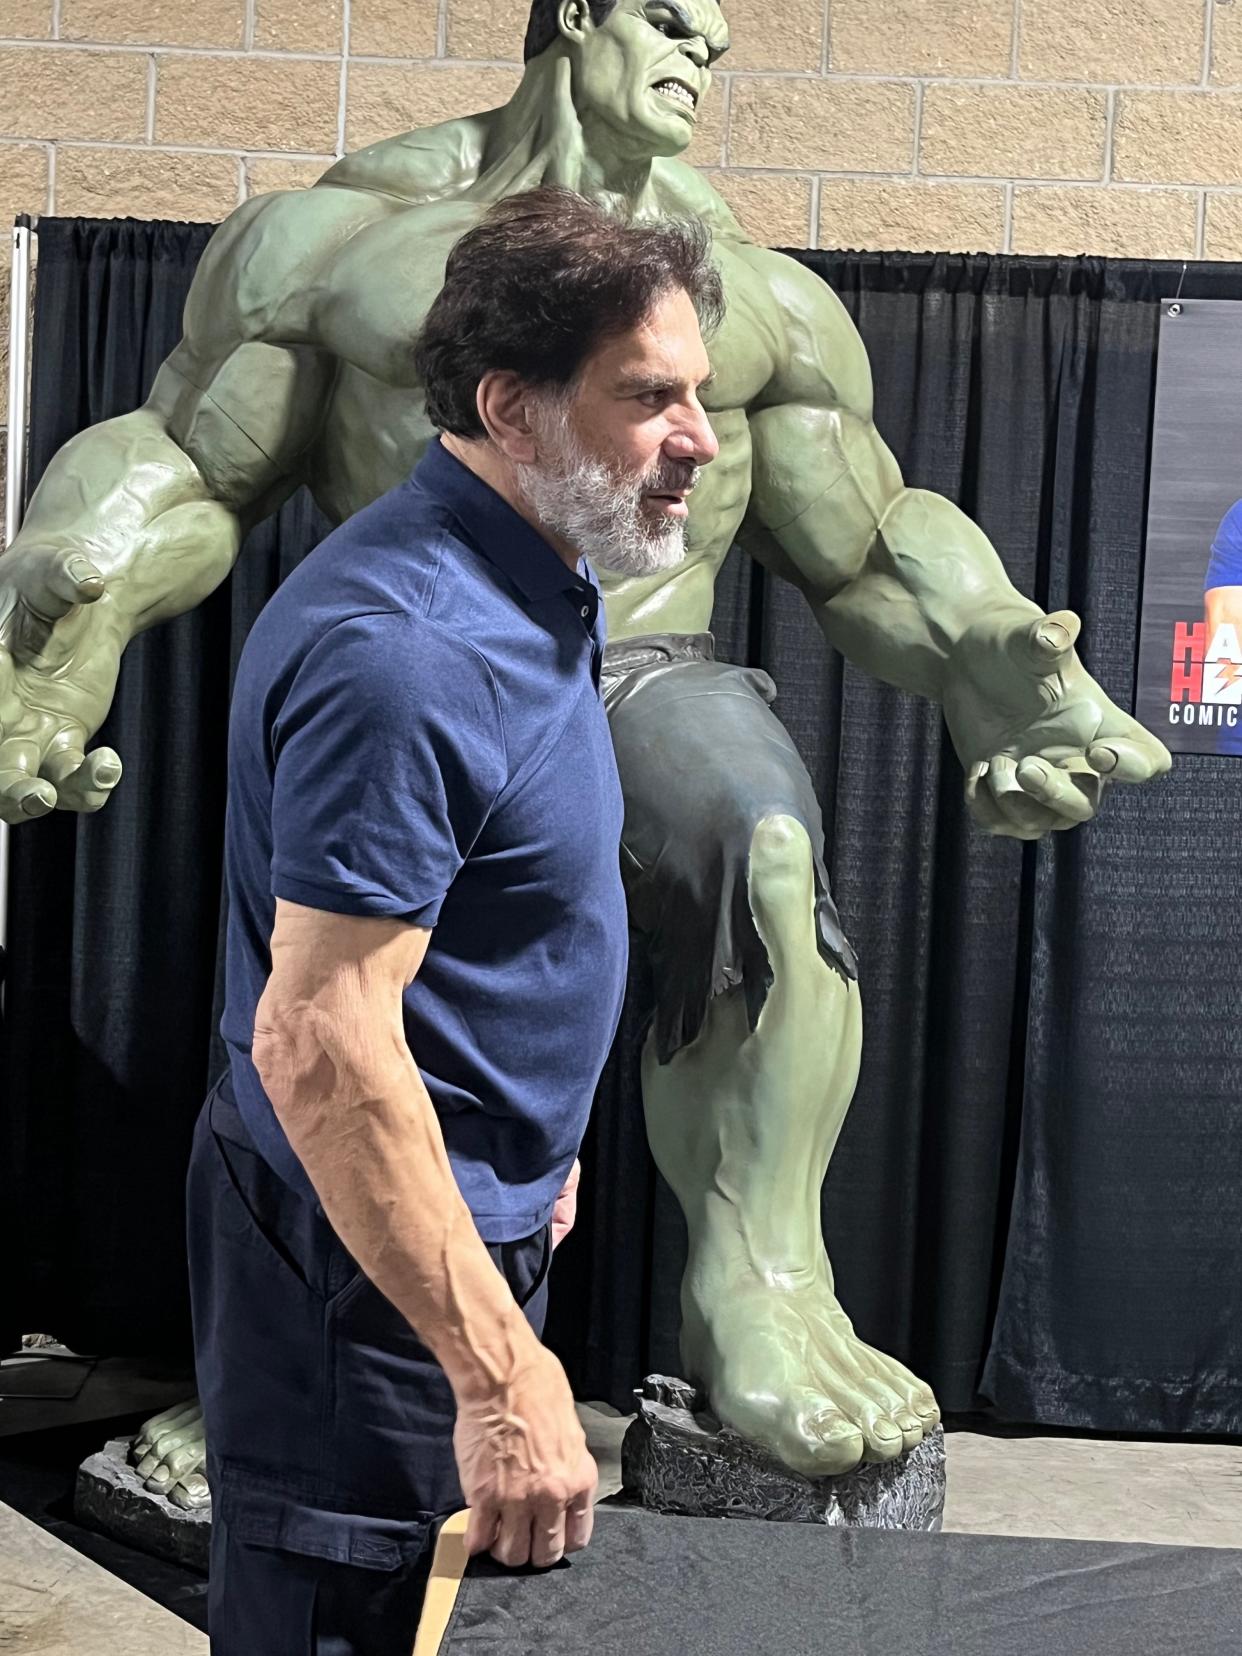 Lou Ferrigno, who played "The Incredible Hulk," was a key attraction at the 2023 Hall of Heroes Comic Con in Elkhart.